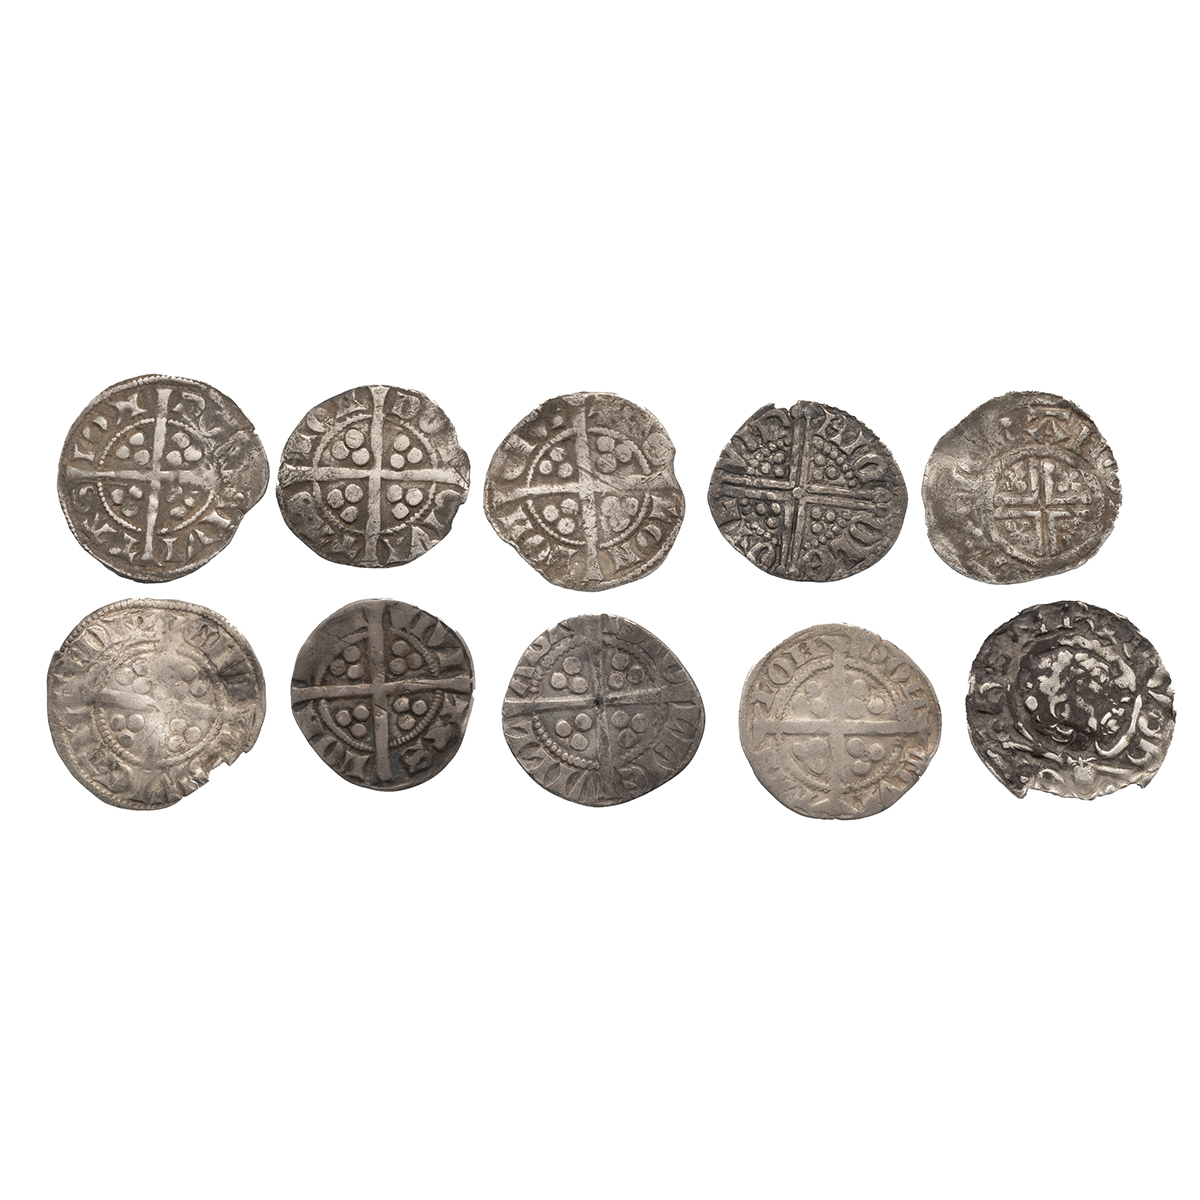 Ten (10) silver Pennies of King Edward I (1272-1307) and King Edward II (1307-1327). Weight: 12g ... - Image 2 of 2